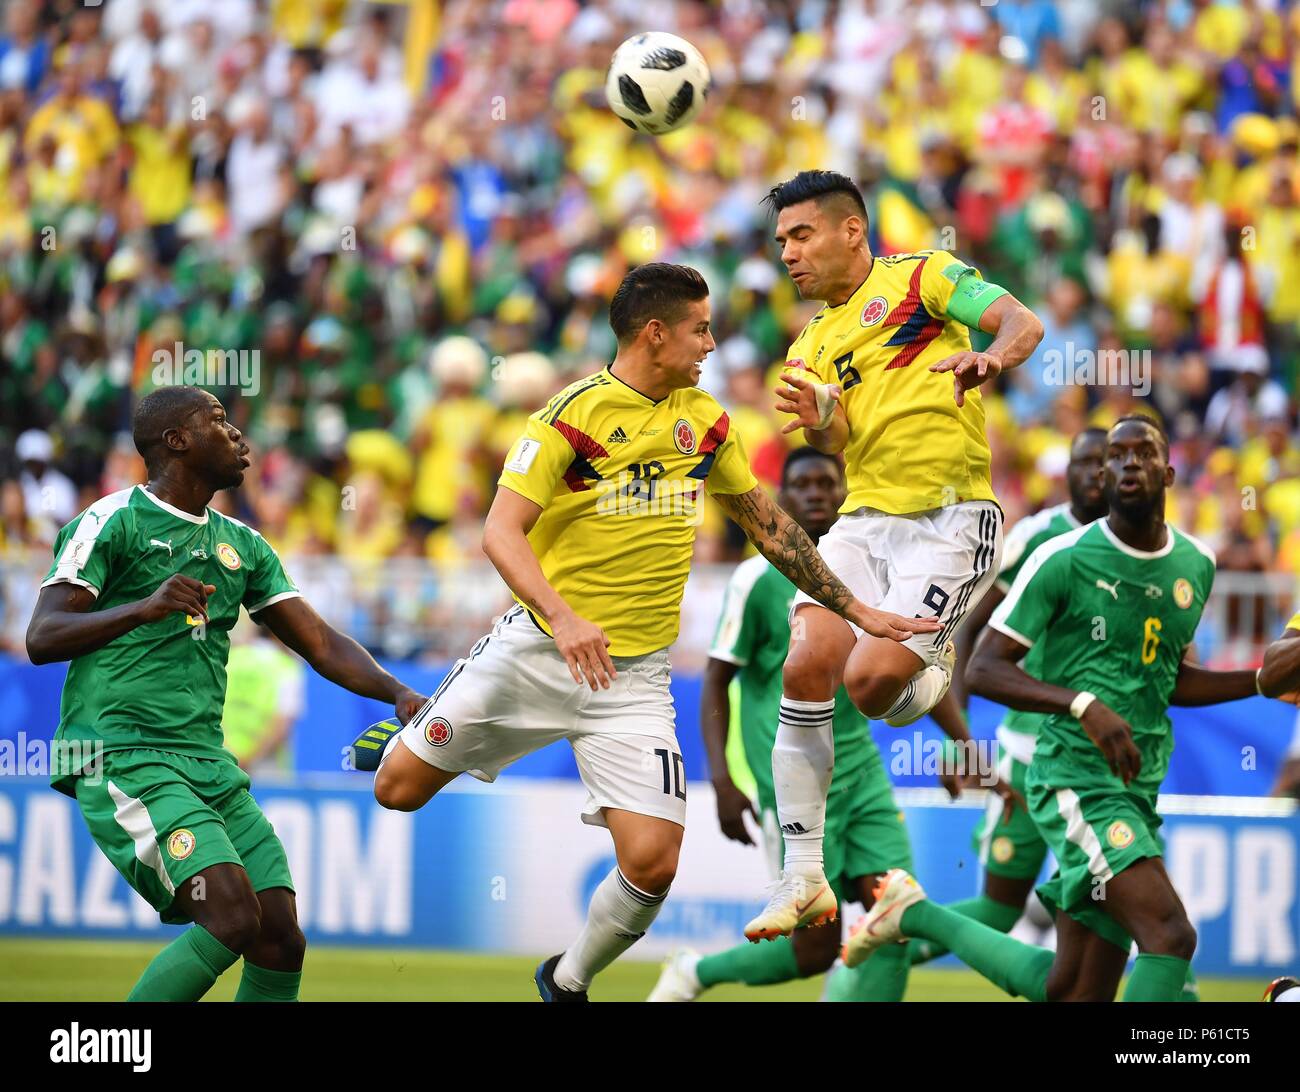 Samara, Russia. 28th June, 2018. Radamel Falcao (2nd R) competes for a header during the 2018 FIFA World Cup Group H match between Colombia and Senegal in Samara, Russia, June 28, 2018. Credit: Liu Dawei/Xinhua/Alamy Live News Stock Photo